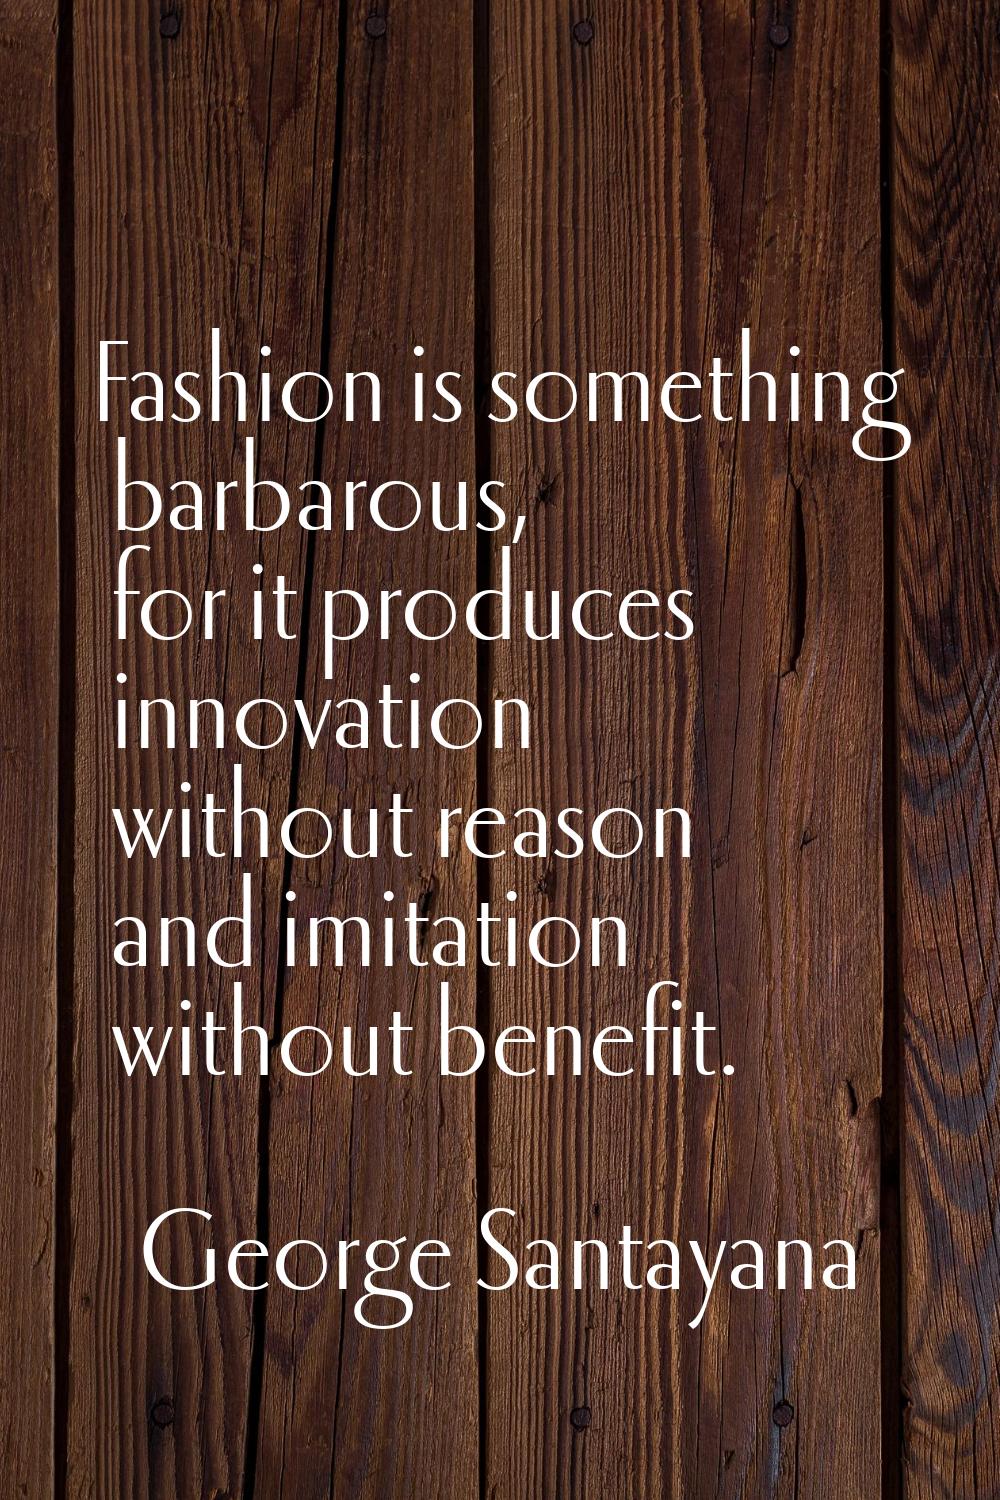 Fashion is something barbarous, for it produces innovation without reason and imitation without ben